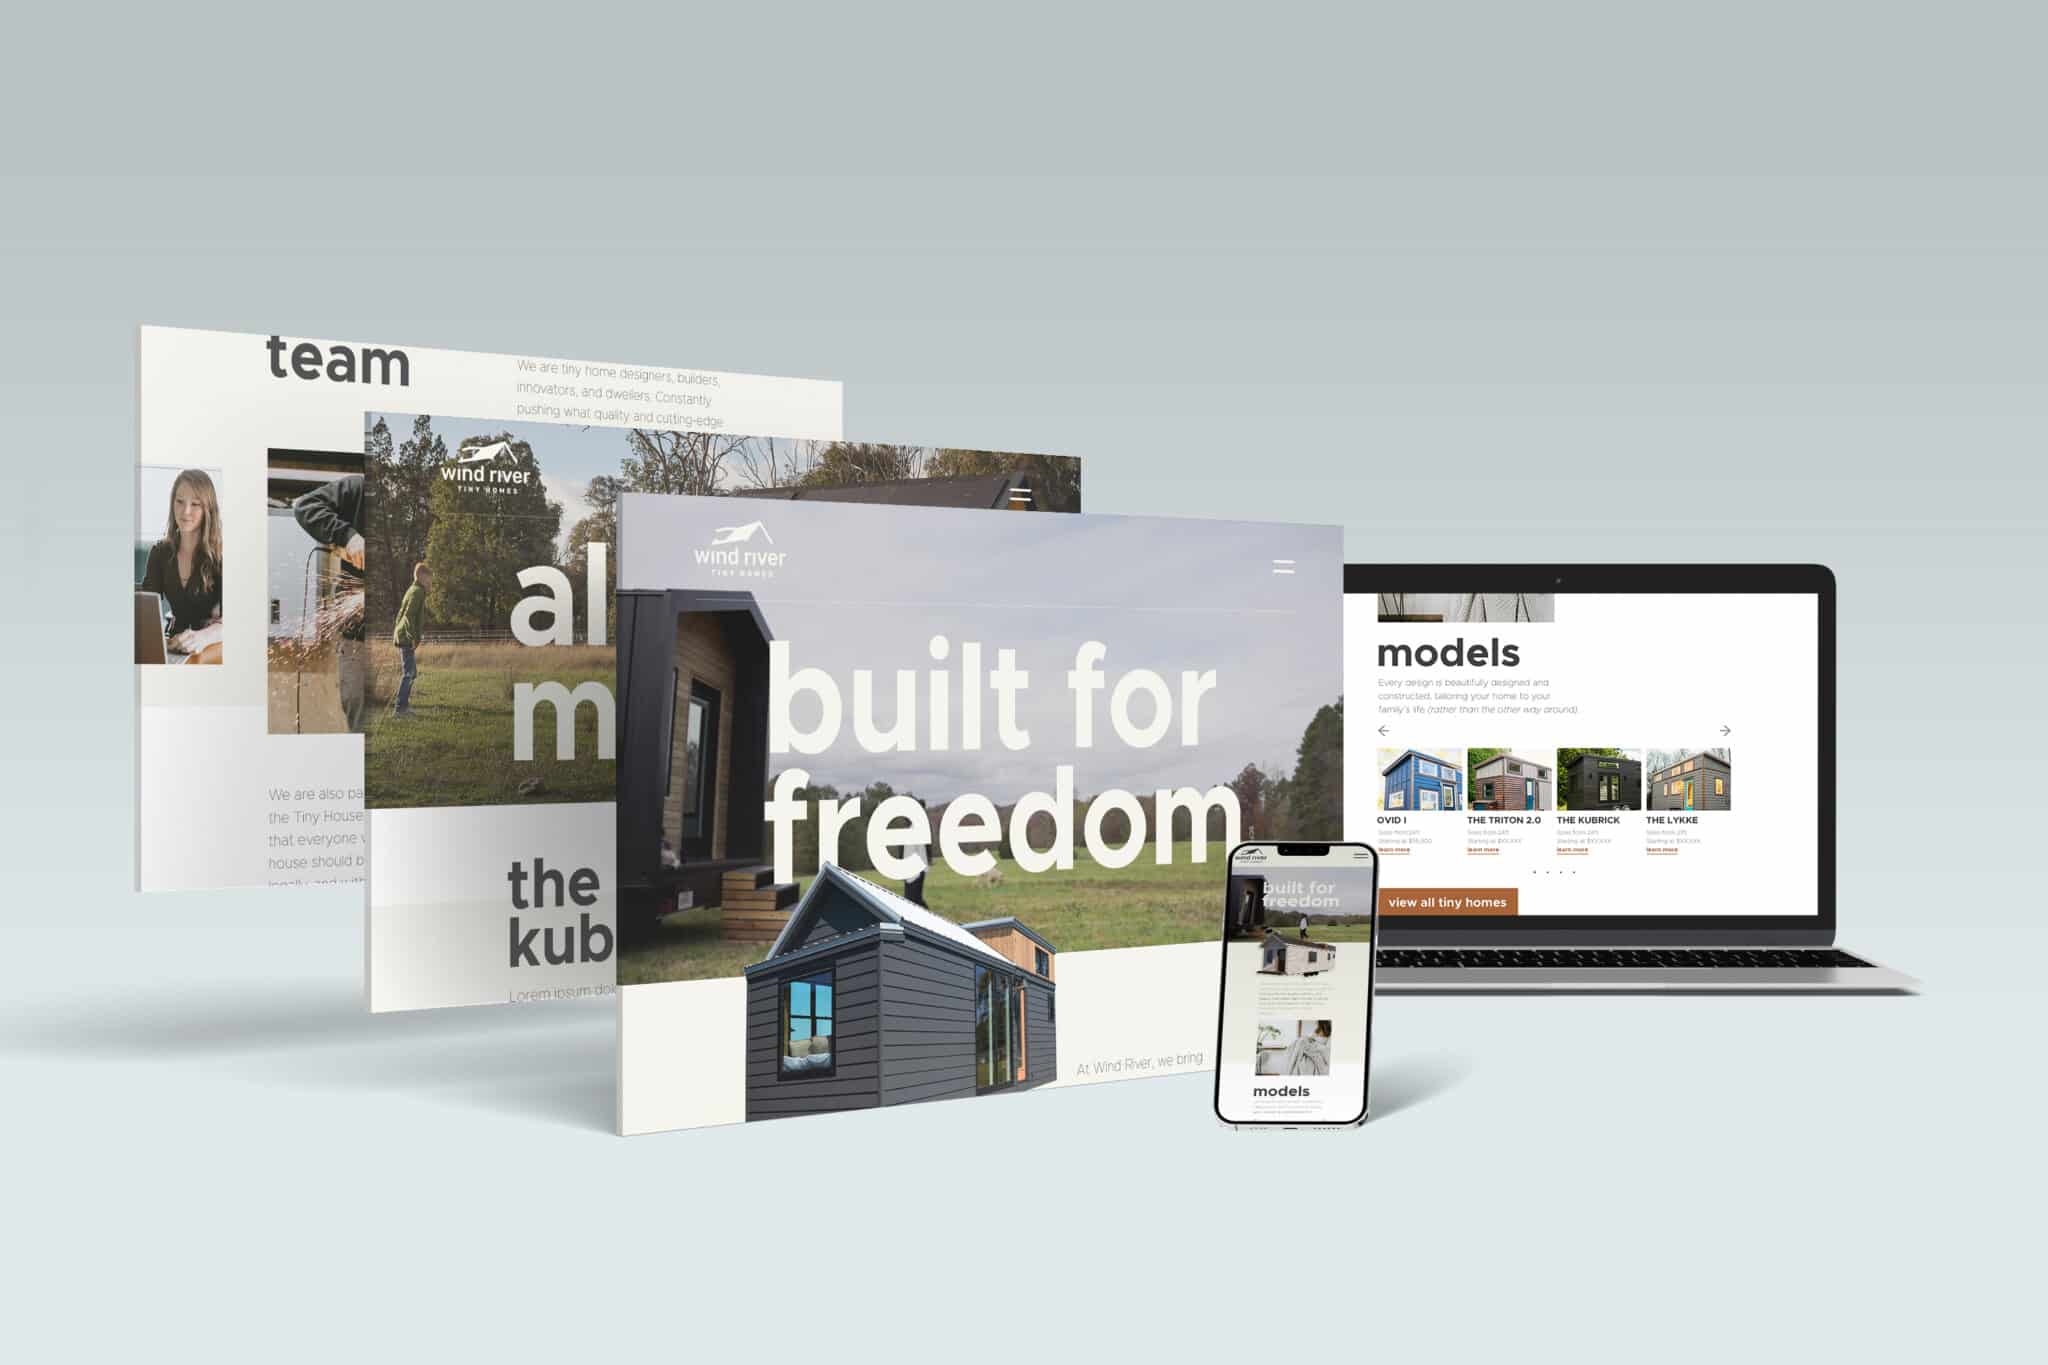 A laptop, smartphone, and three website pages are shown displaying different elements of a website for "Wind River." The pages include text such as "built for freedom," "team," and "models," along with images of Tiny Homes. The overall theme is modern and minimalist, showcasing Wind River as a Big Brand in innovative living spaces.